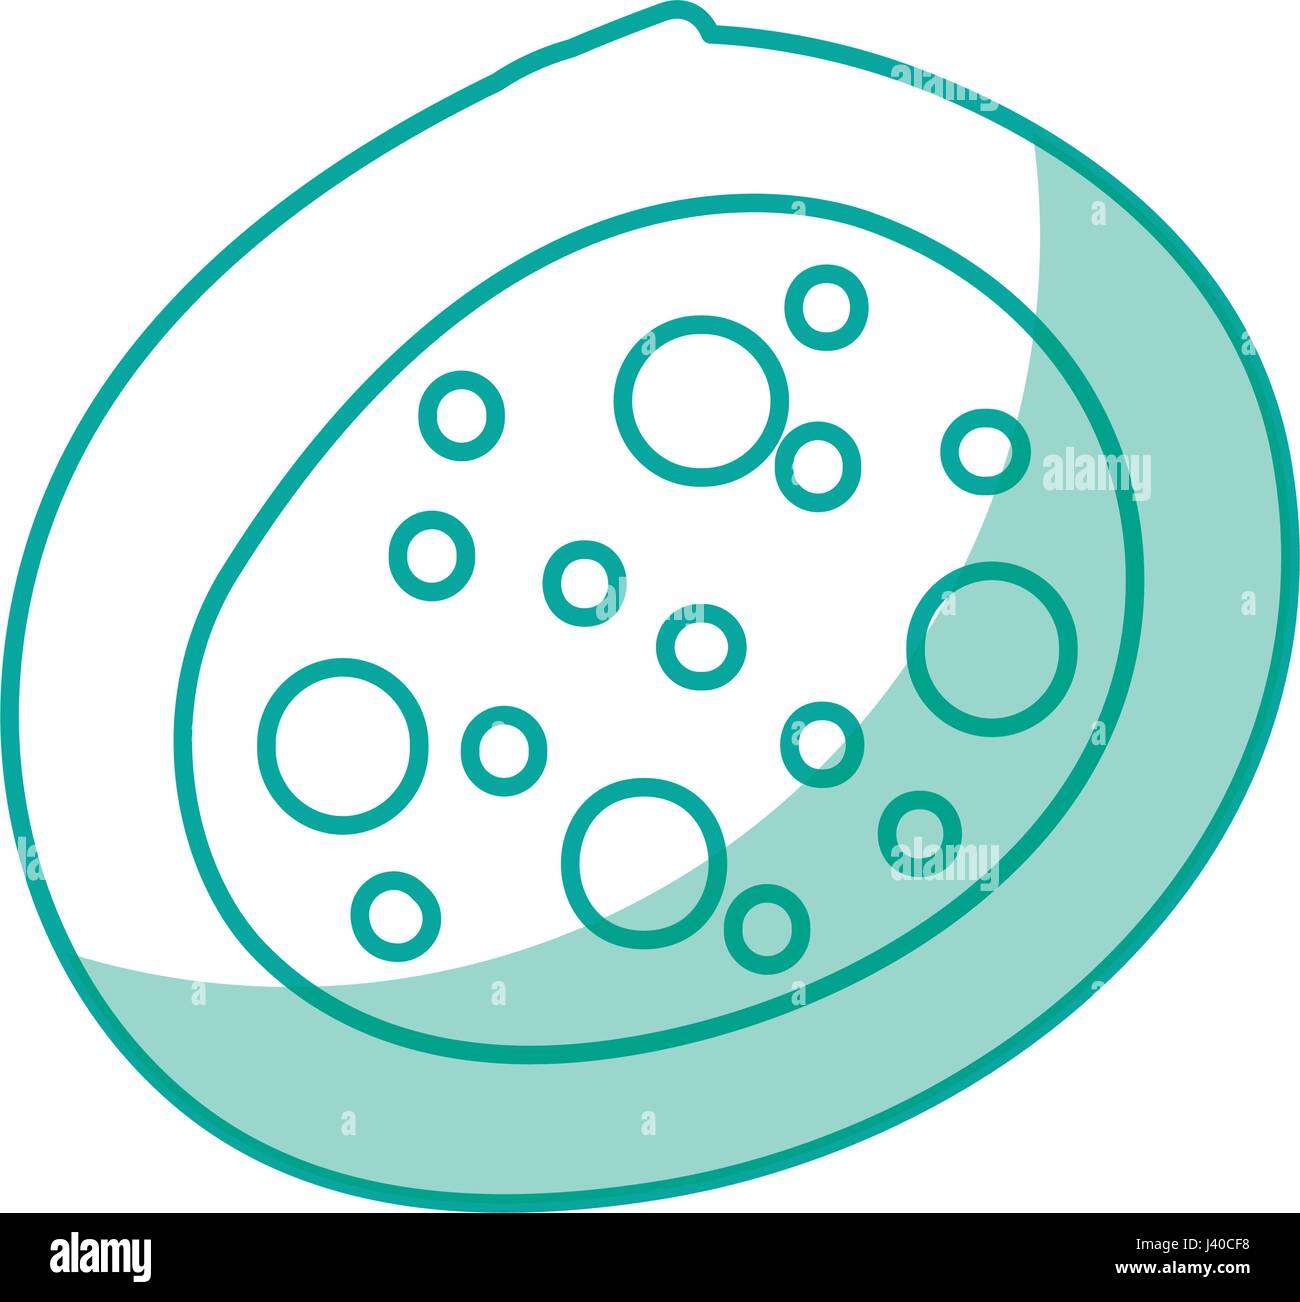 Bacterial cell structure icon Stock Vector